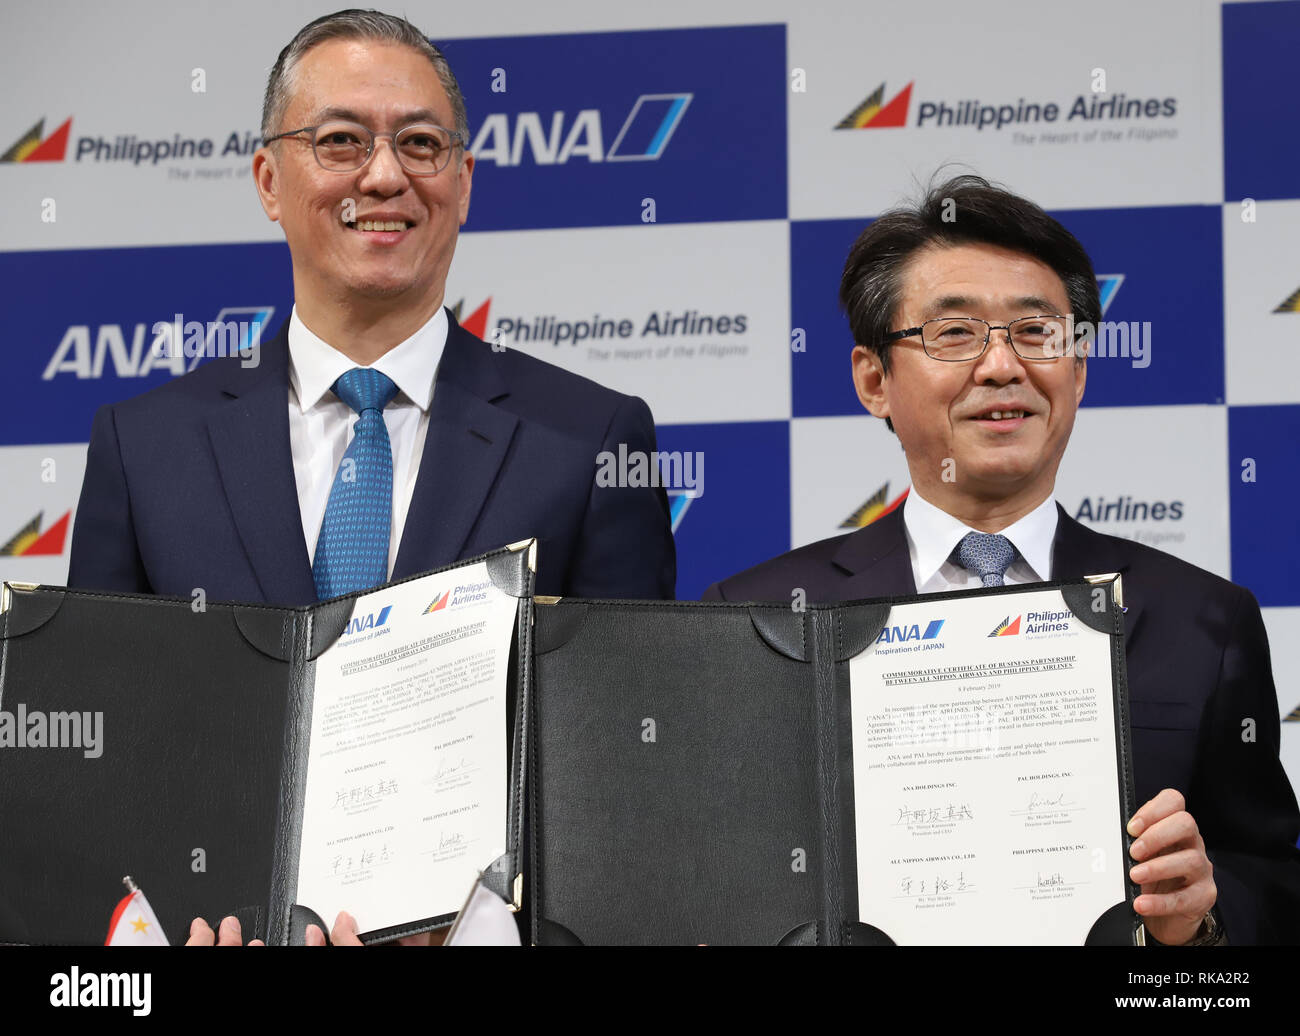 Tokyo, Japan. 8th Feb, 2019. LT Group president and PAL Holdings director Michael Tan (L) and ANA Holdings president Shinya Katanozaka show their agreement as they announce the companies expand their partnerships in Tokyo on Friday, February 8, 2019. ANA Holdings will invest 95 million U.S. dollars to PAL Holdings and acquire 9.5 percent of PAL Holdings shares. Credit: Yoshio Tsunoda/AFLO/Alamy Live News Stock Photo